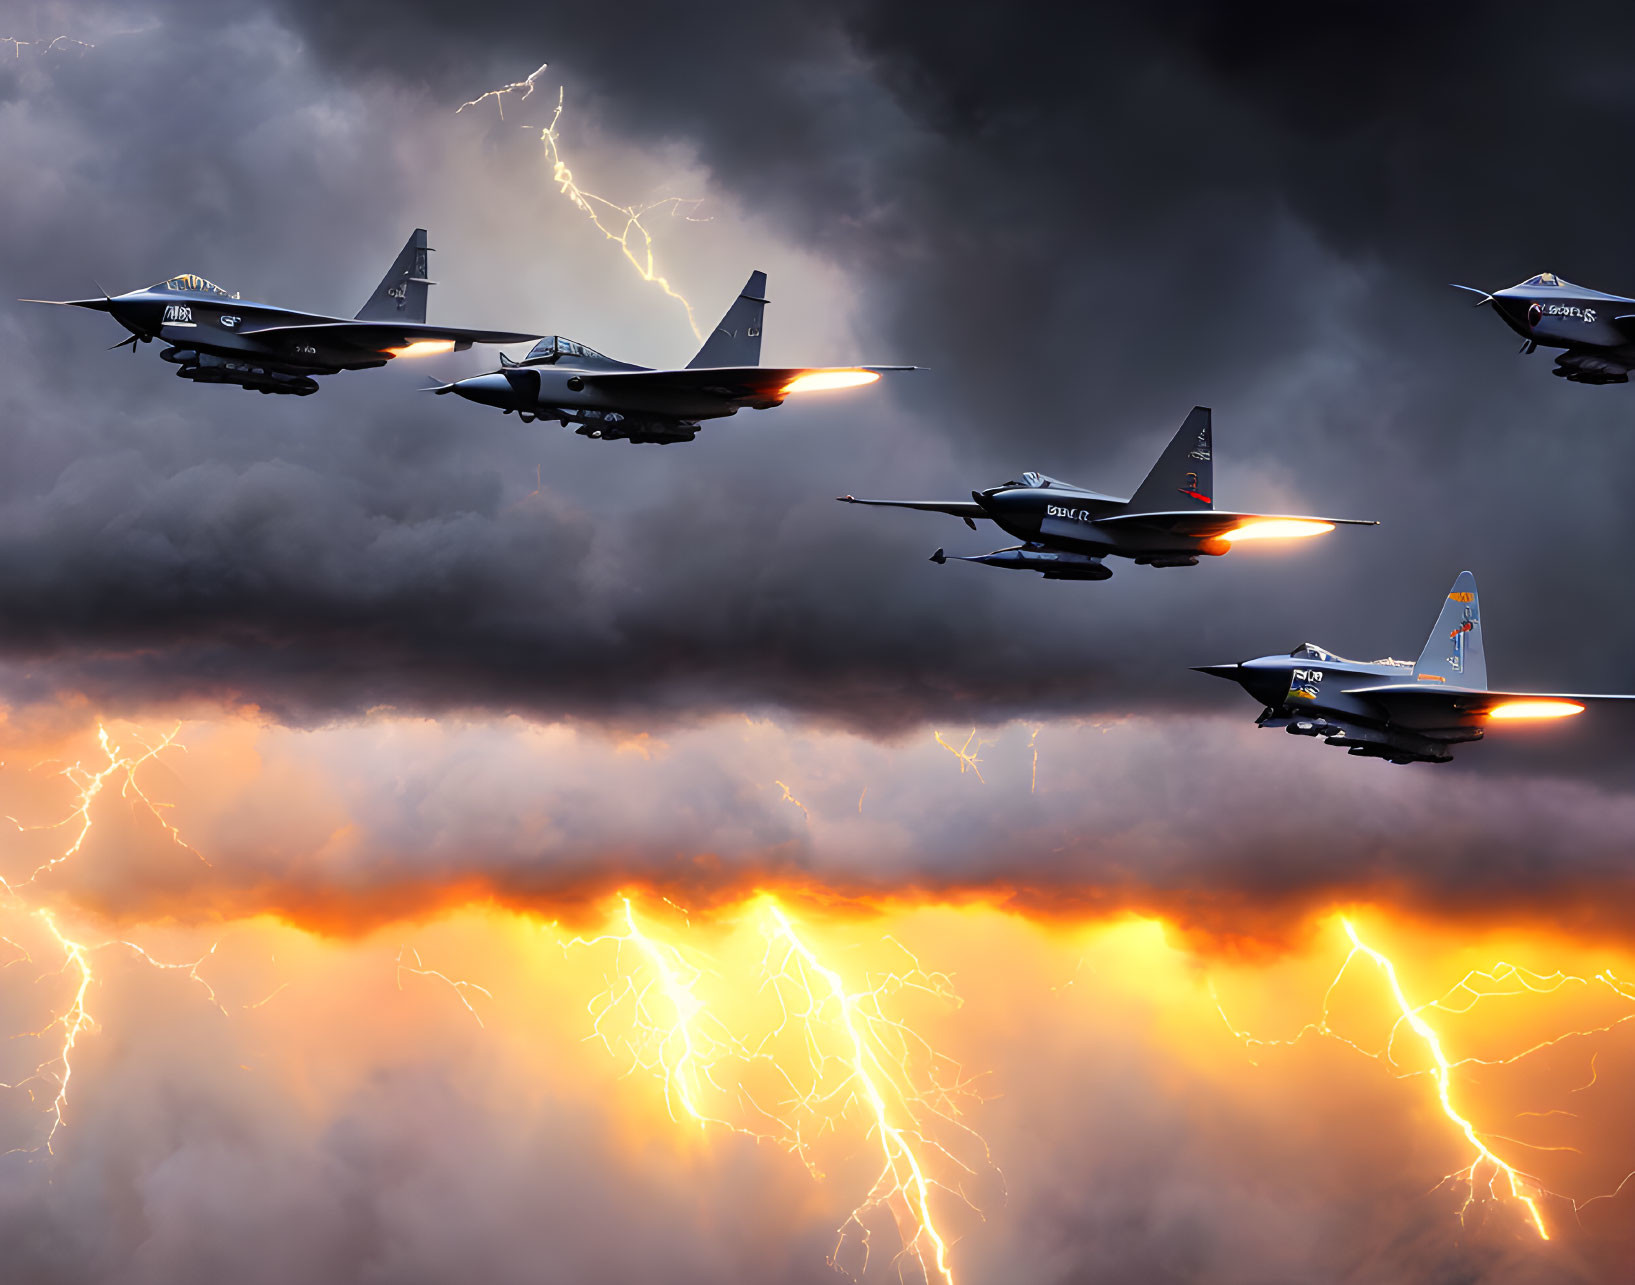 Formation of Fighter Jets Amidst Lightning Strikes and Stormy Sky